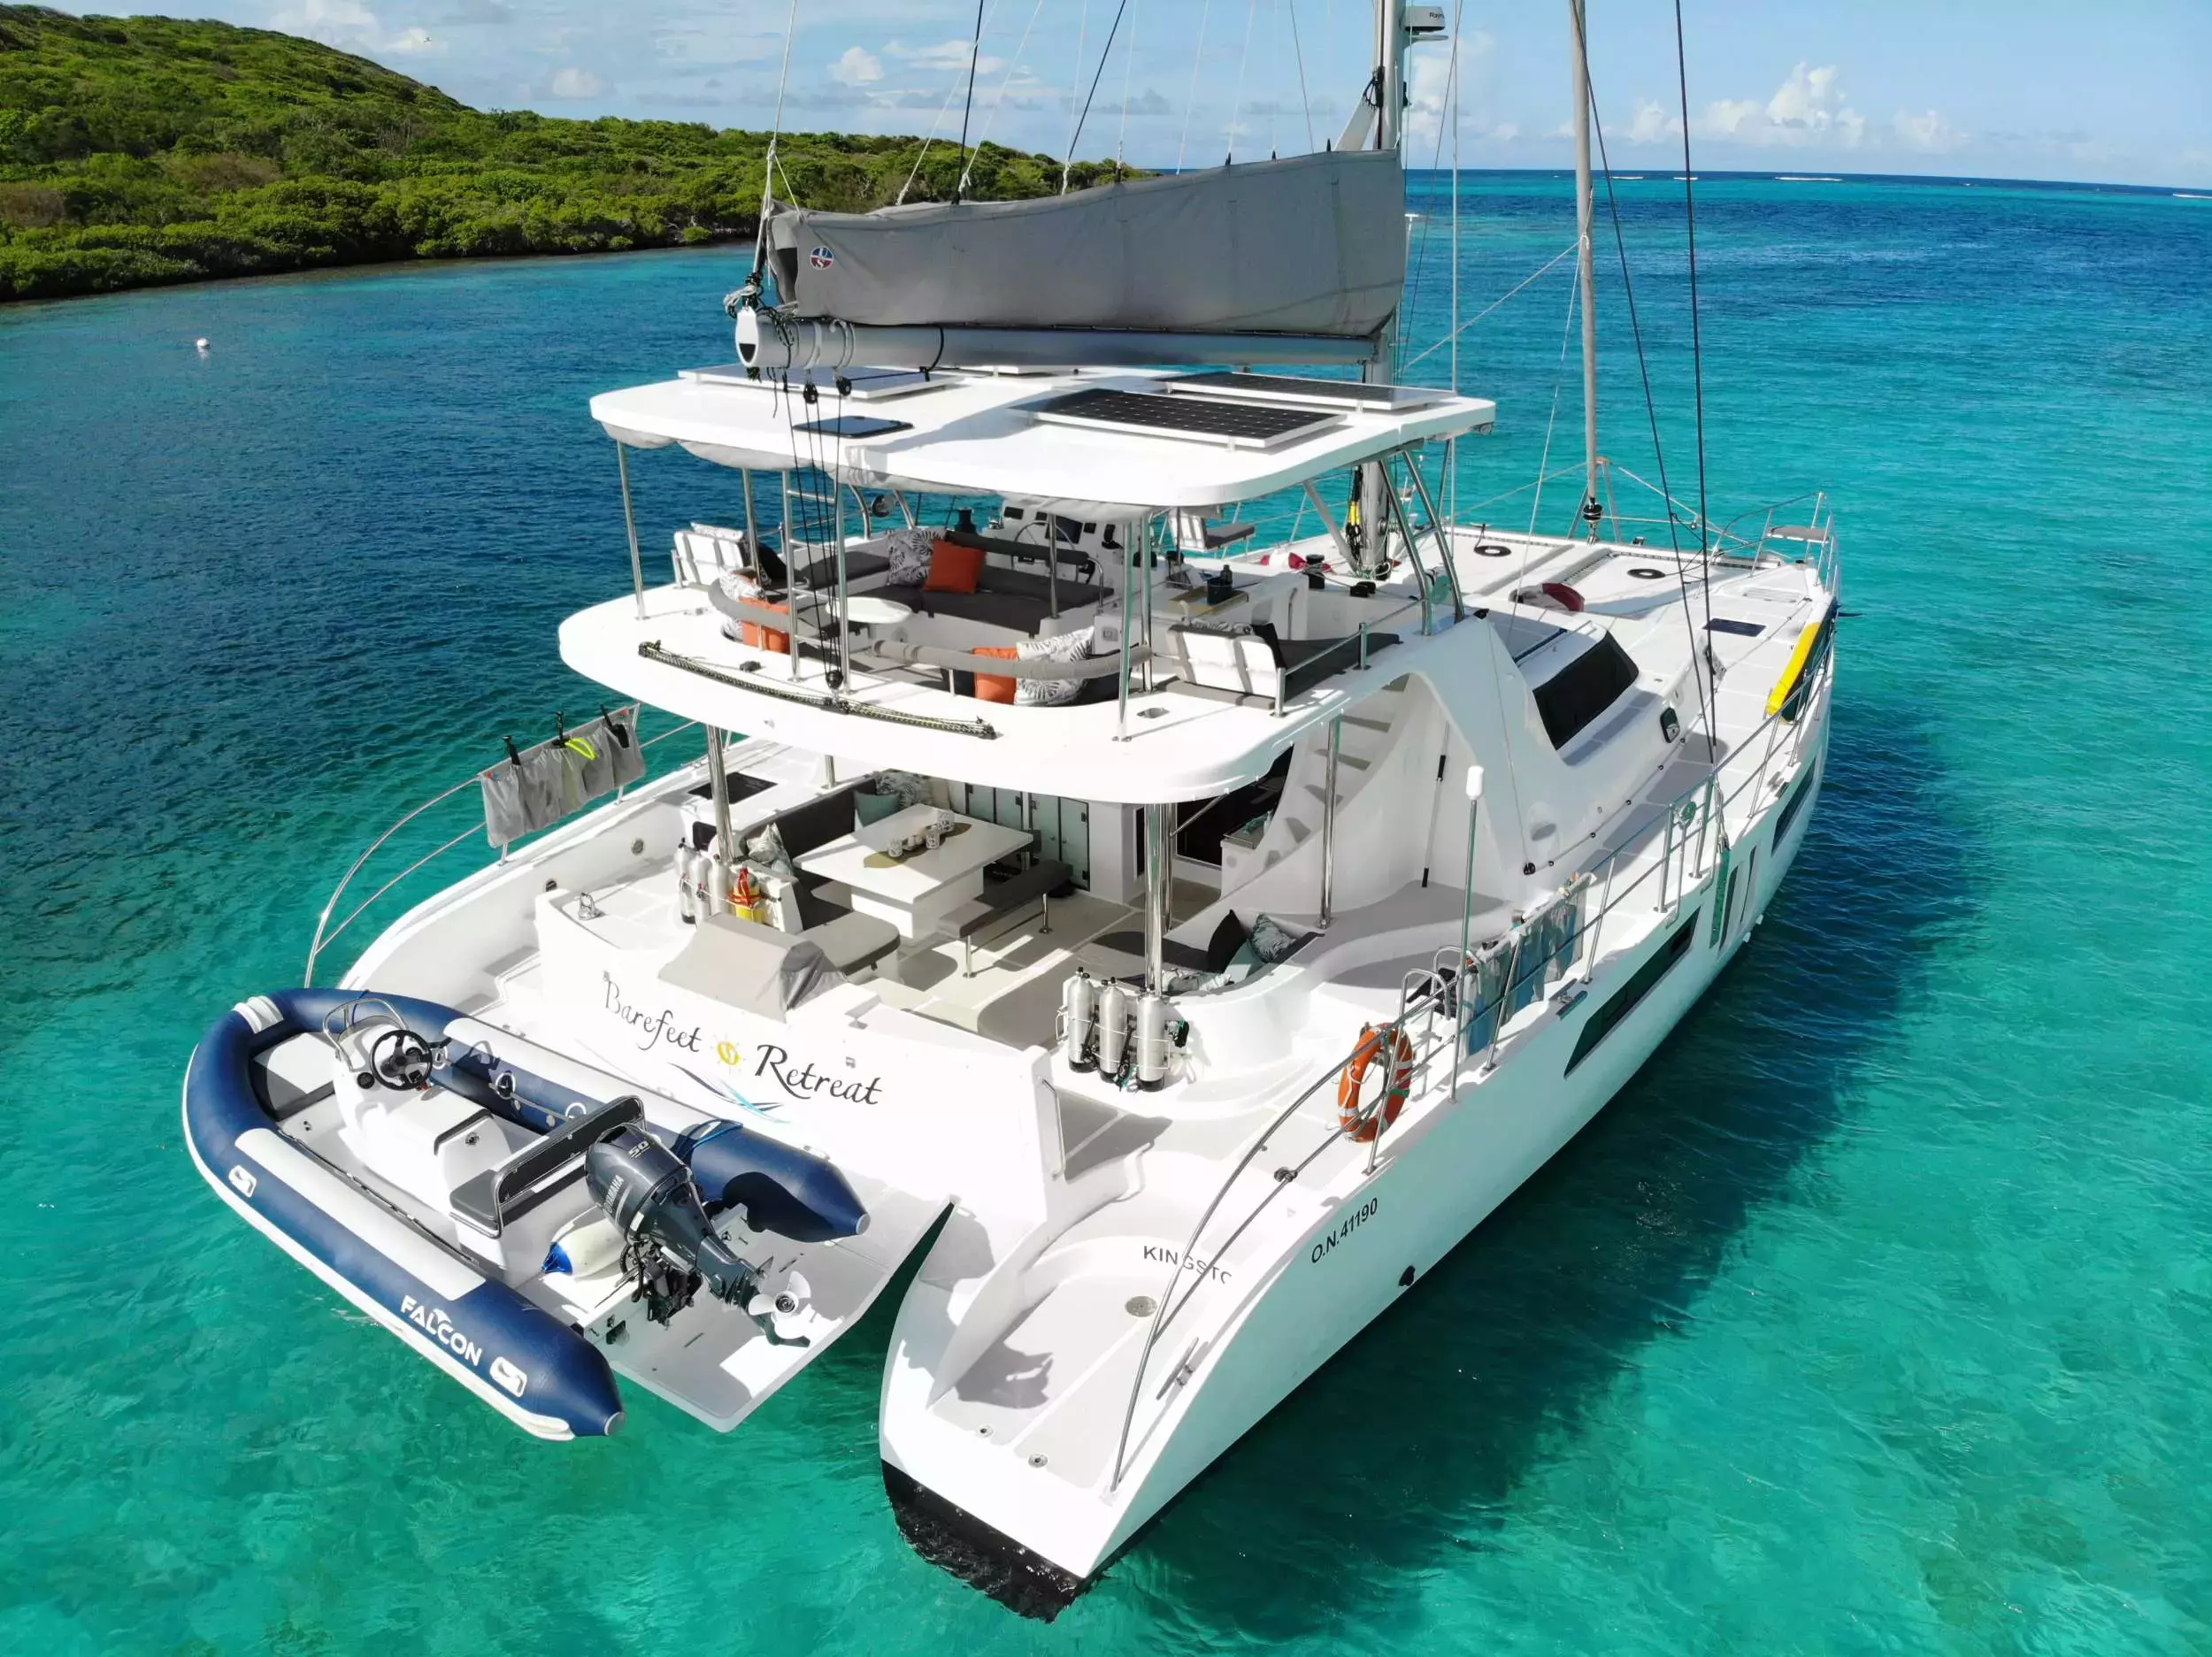 Barefeet Retreat by Royal Cape - Special Offer for a private Sailing Catamaran Rental in Fajardo with a crew